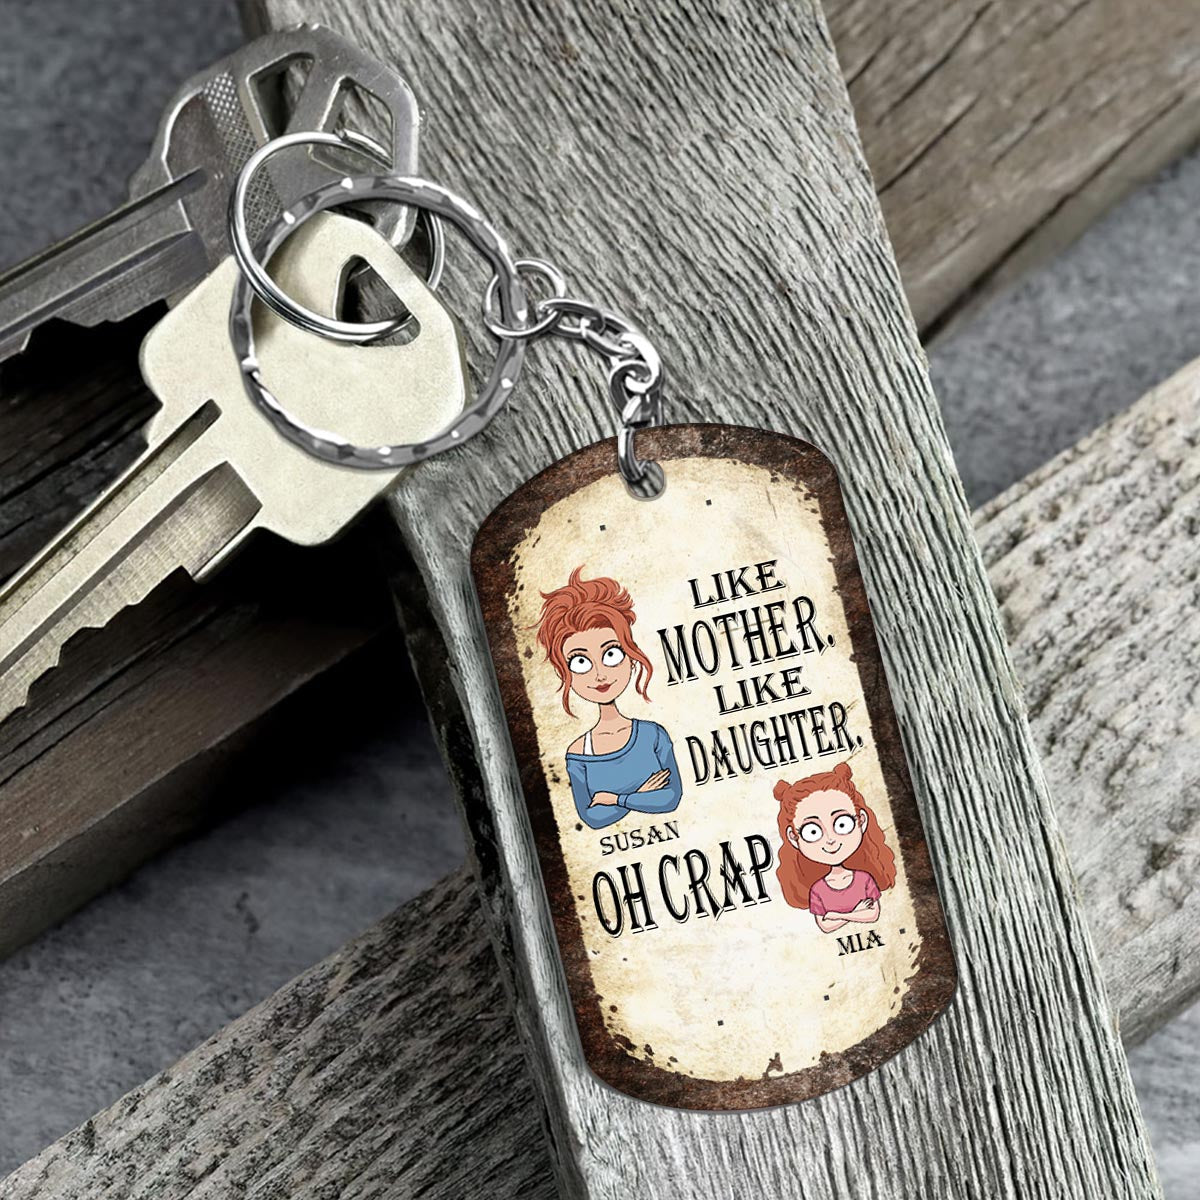 Disover Like Father Like Daughter Like Son - Gift for dad, mom, son, daughter - Personalized Stainless Steel Keychain